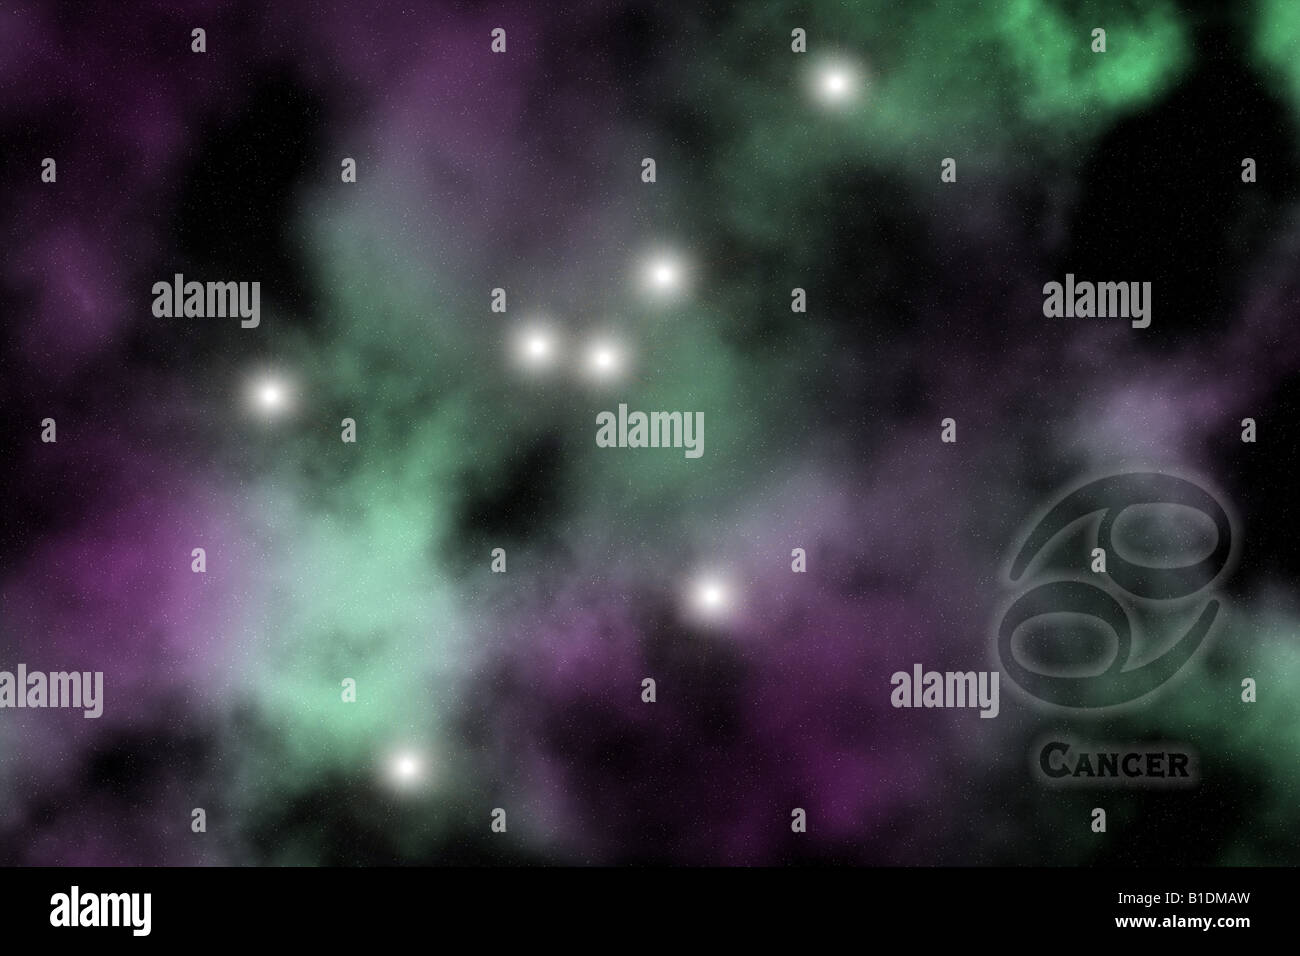 Zodiac - Cancer constellation, with sign and name of Zodiac. Against space galaxy background Stock Photo